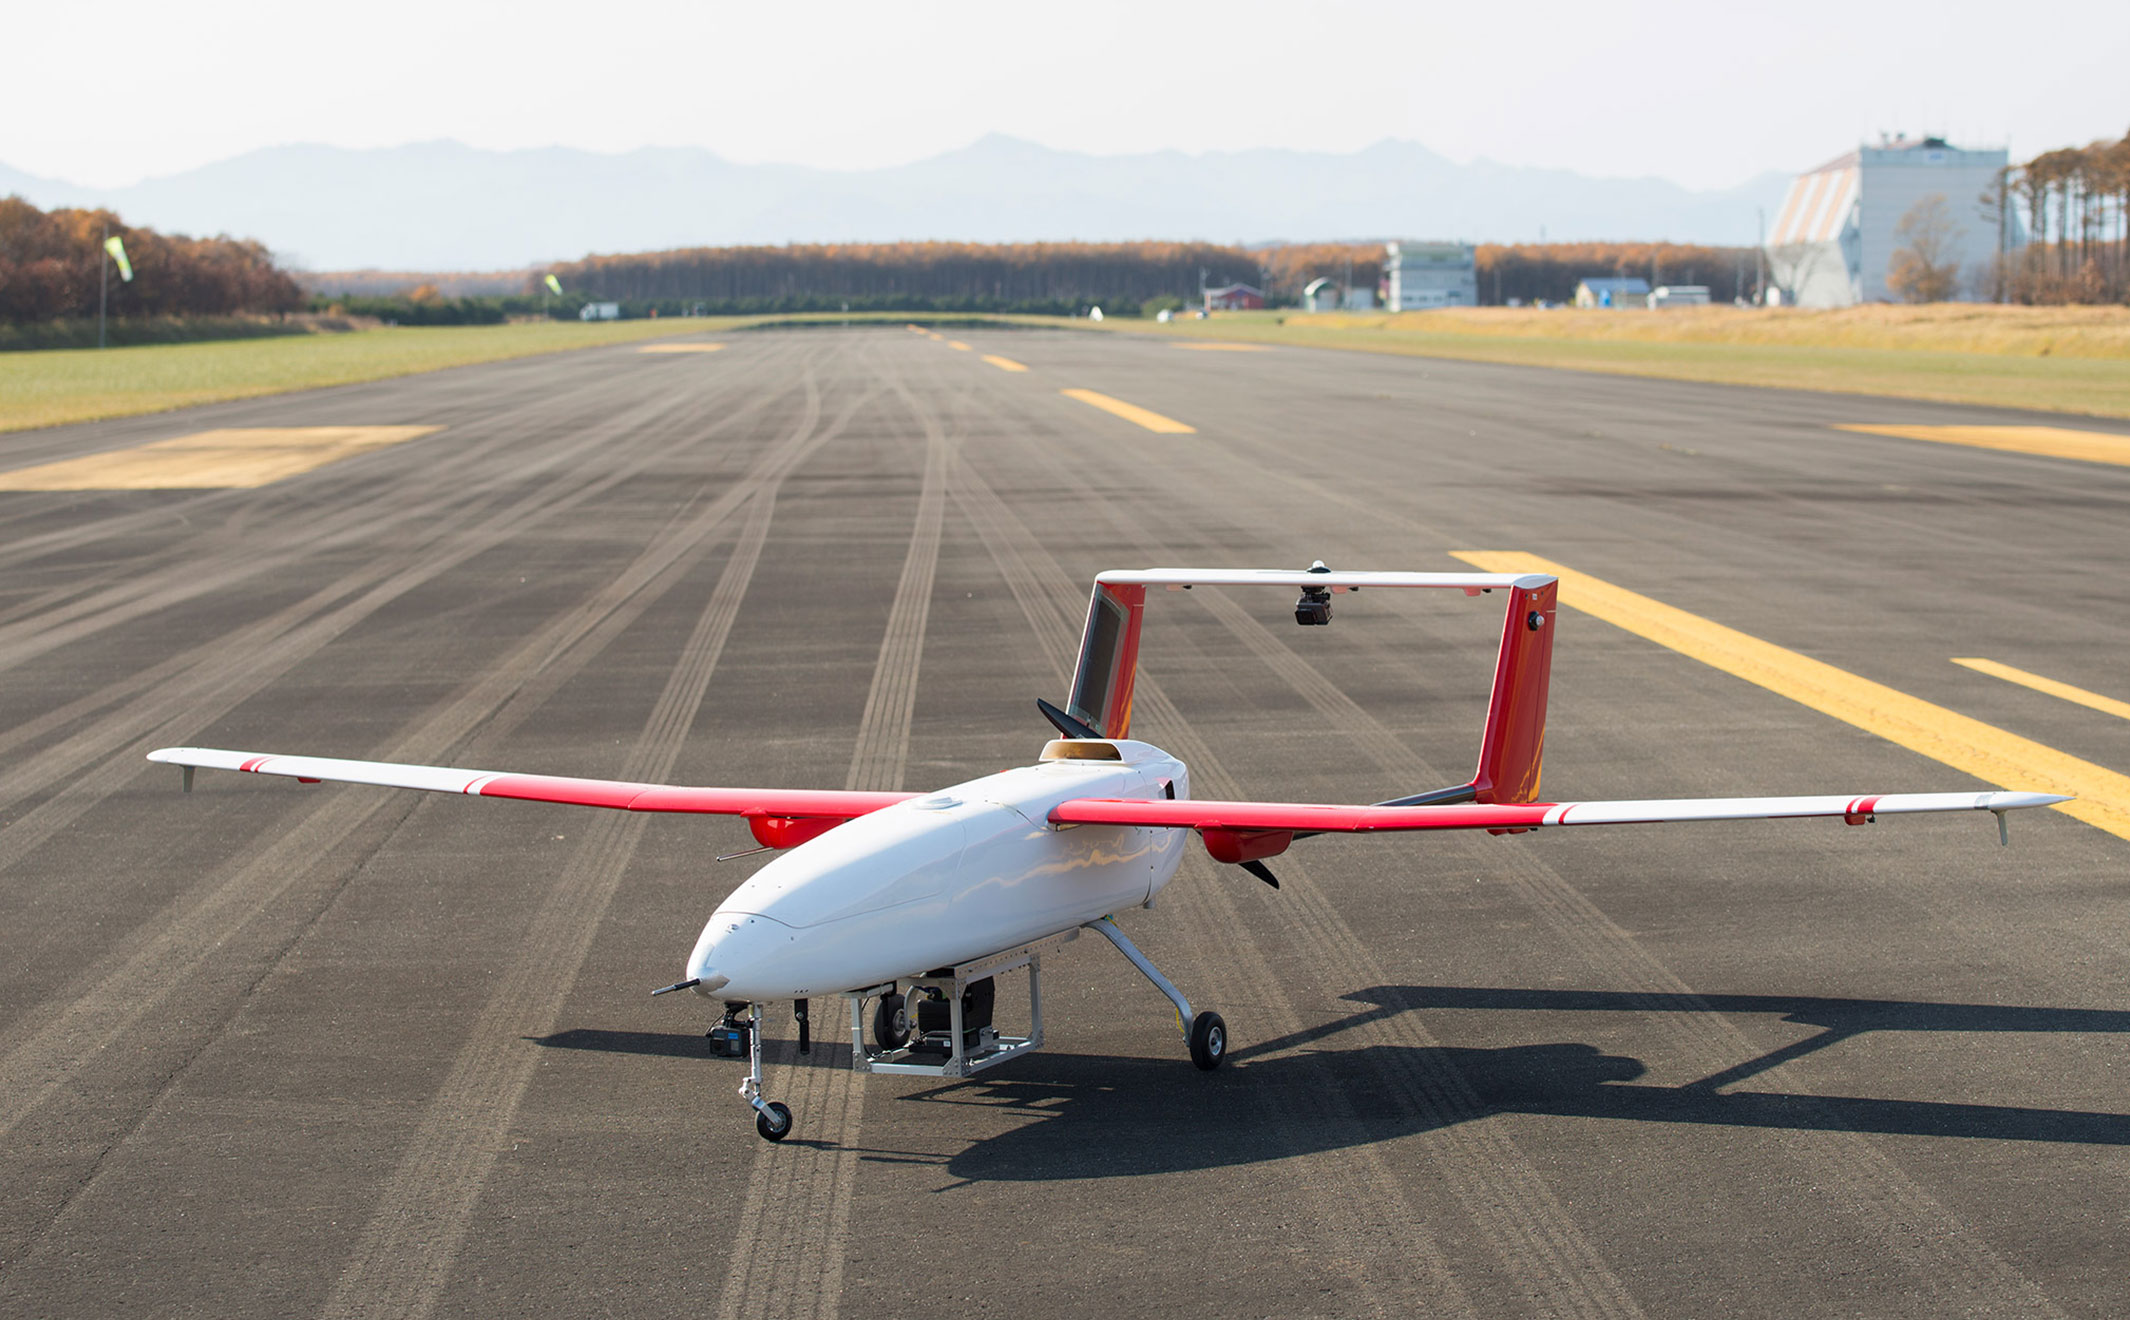 Unmanned aircraft systems (UAS) technology